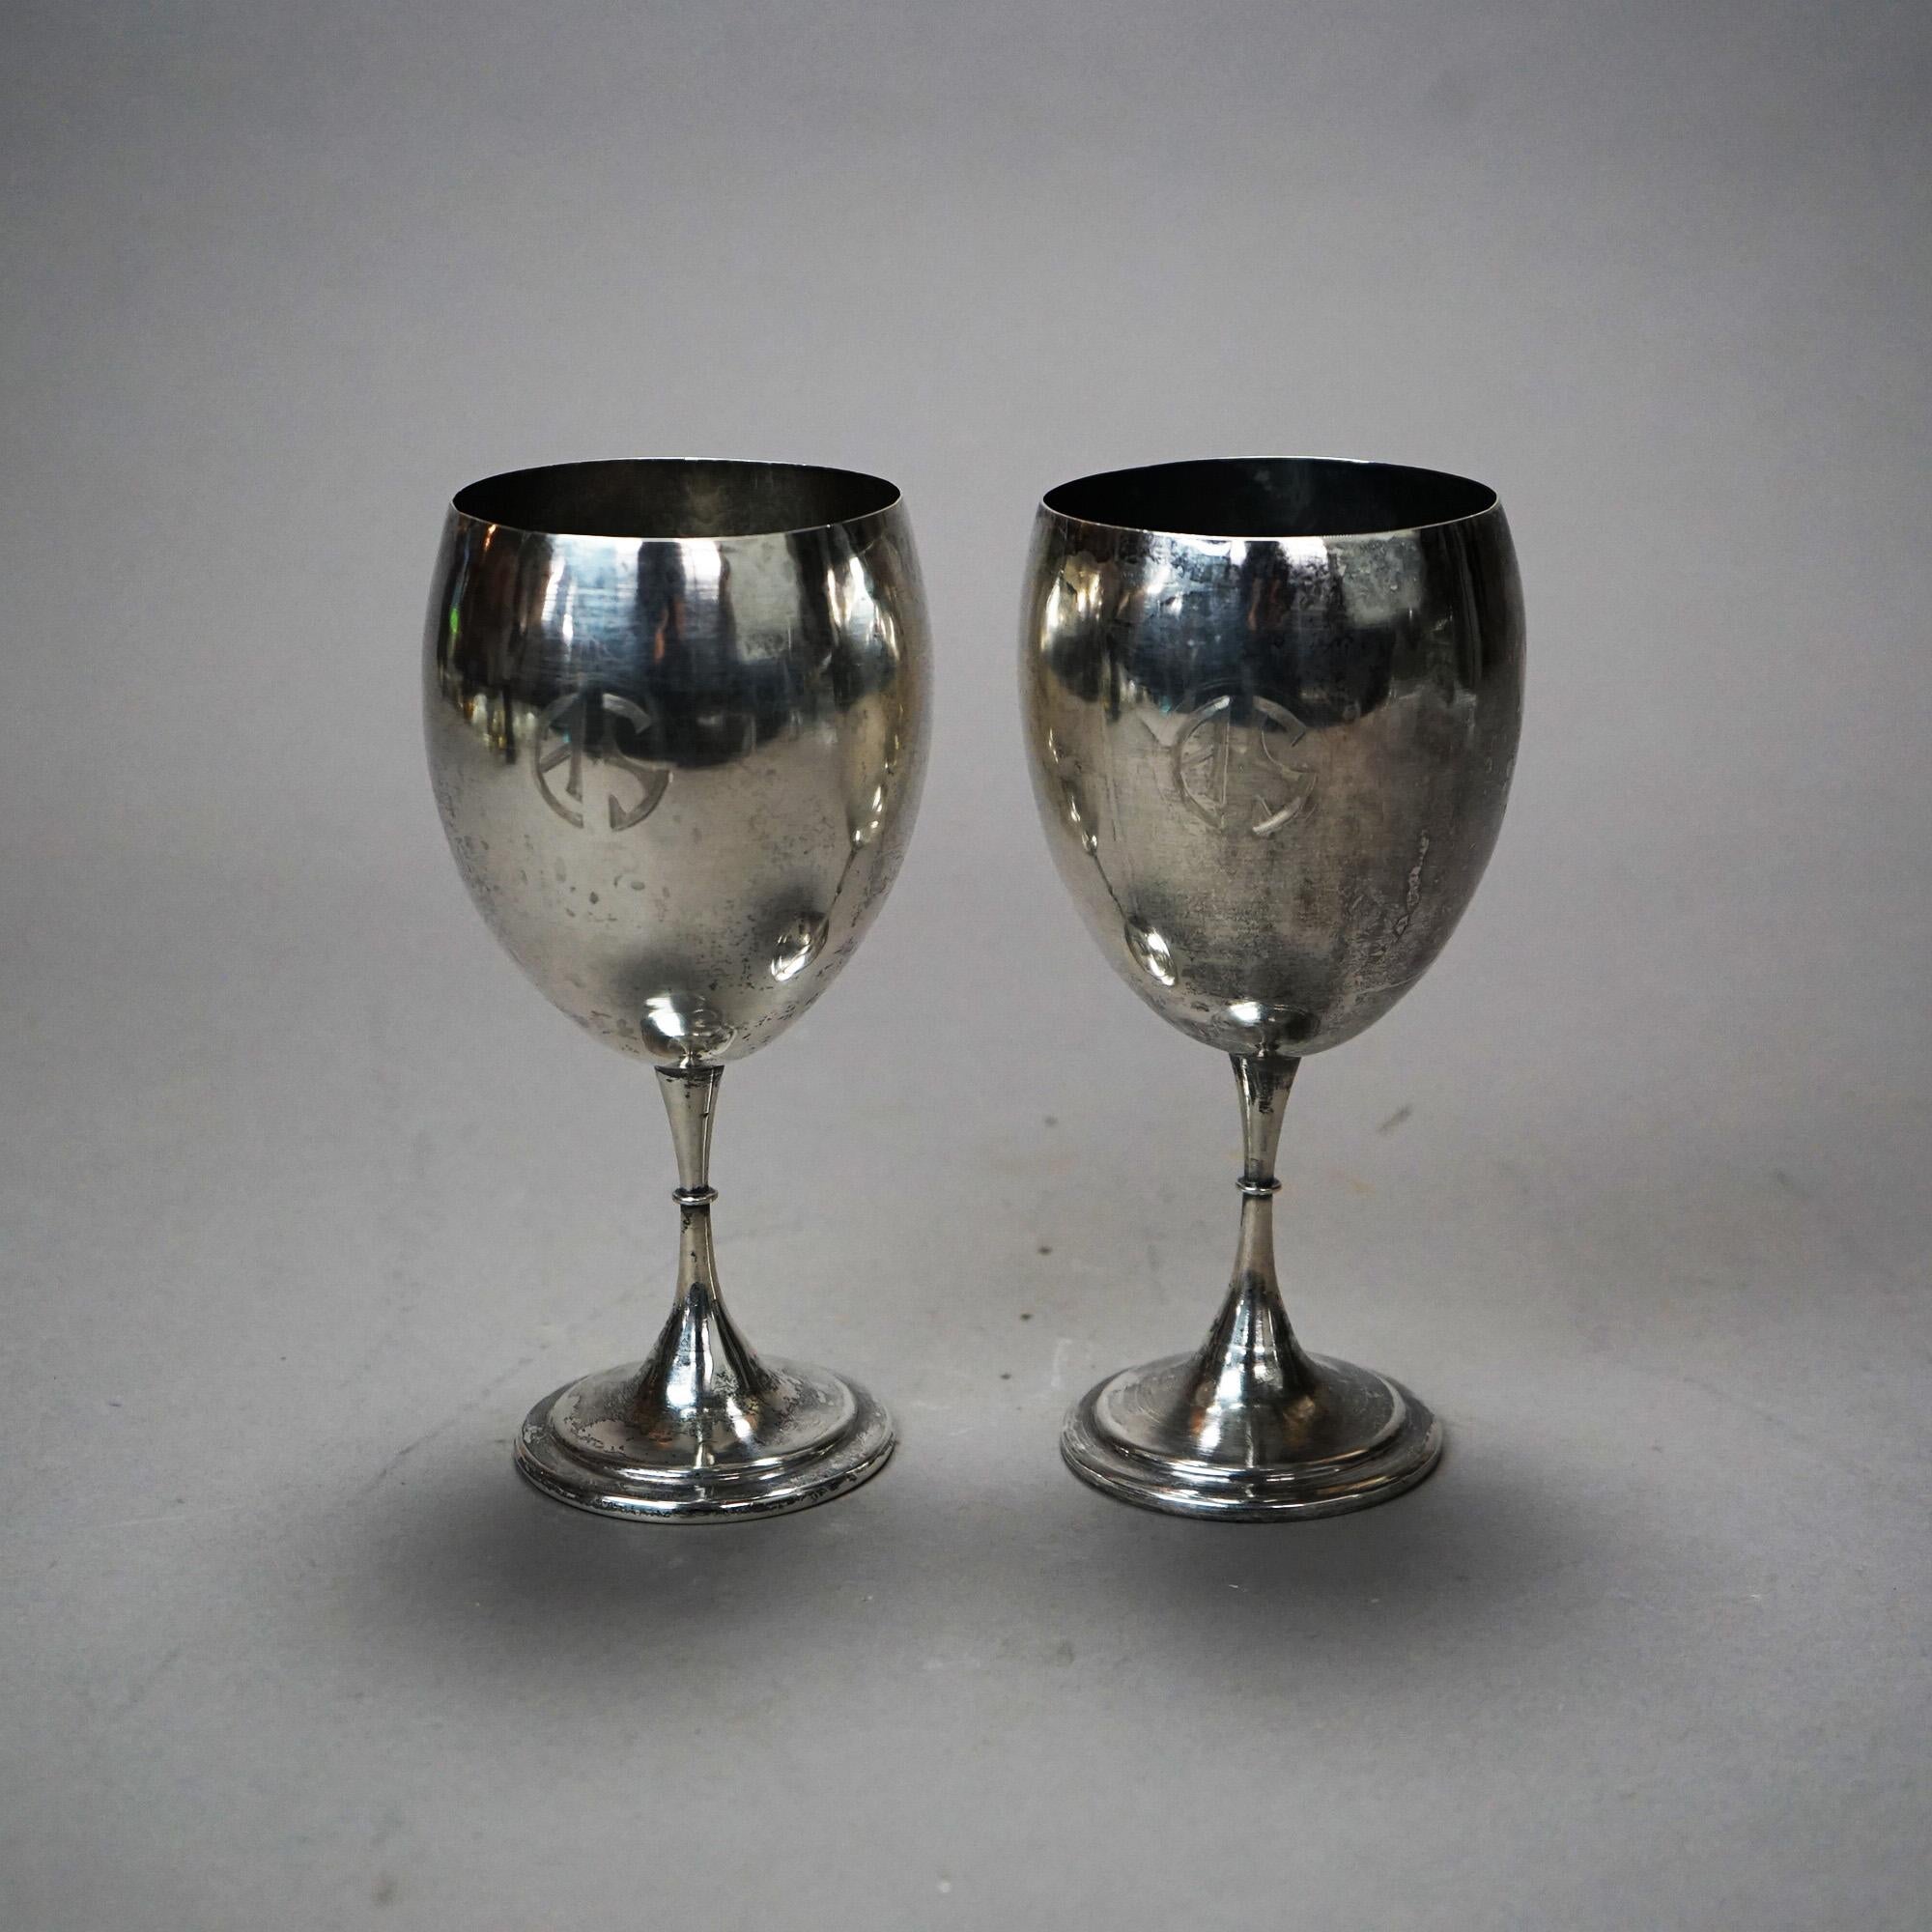 Pair Antique Arts & Crafts Sterling Silver Goblets, Monogram AS, A. Stone (attr), 10 OTZ

Measures - 7